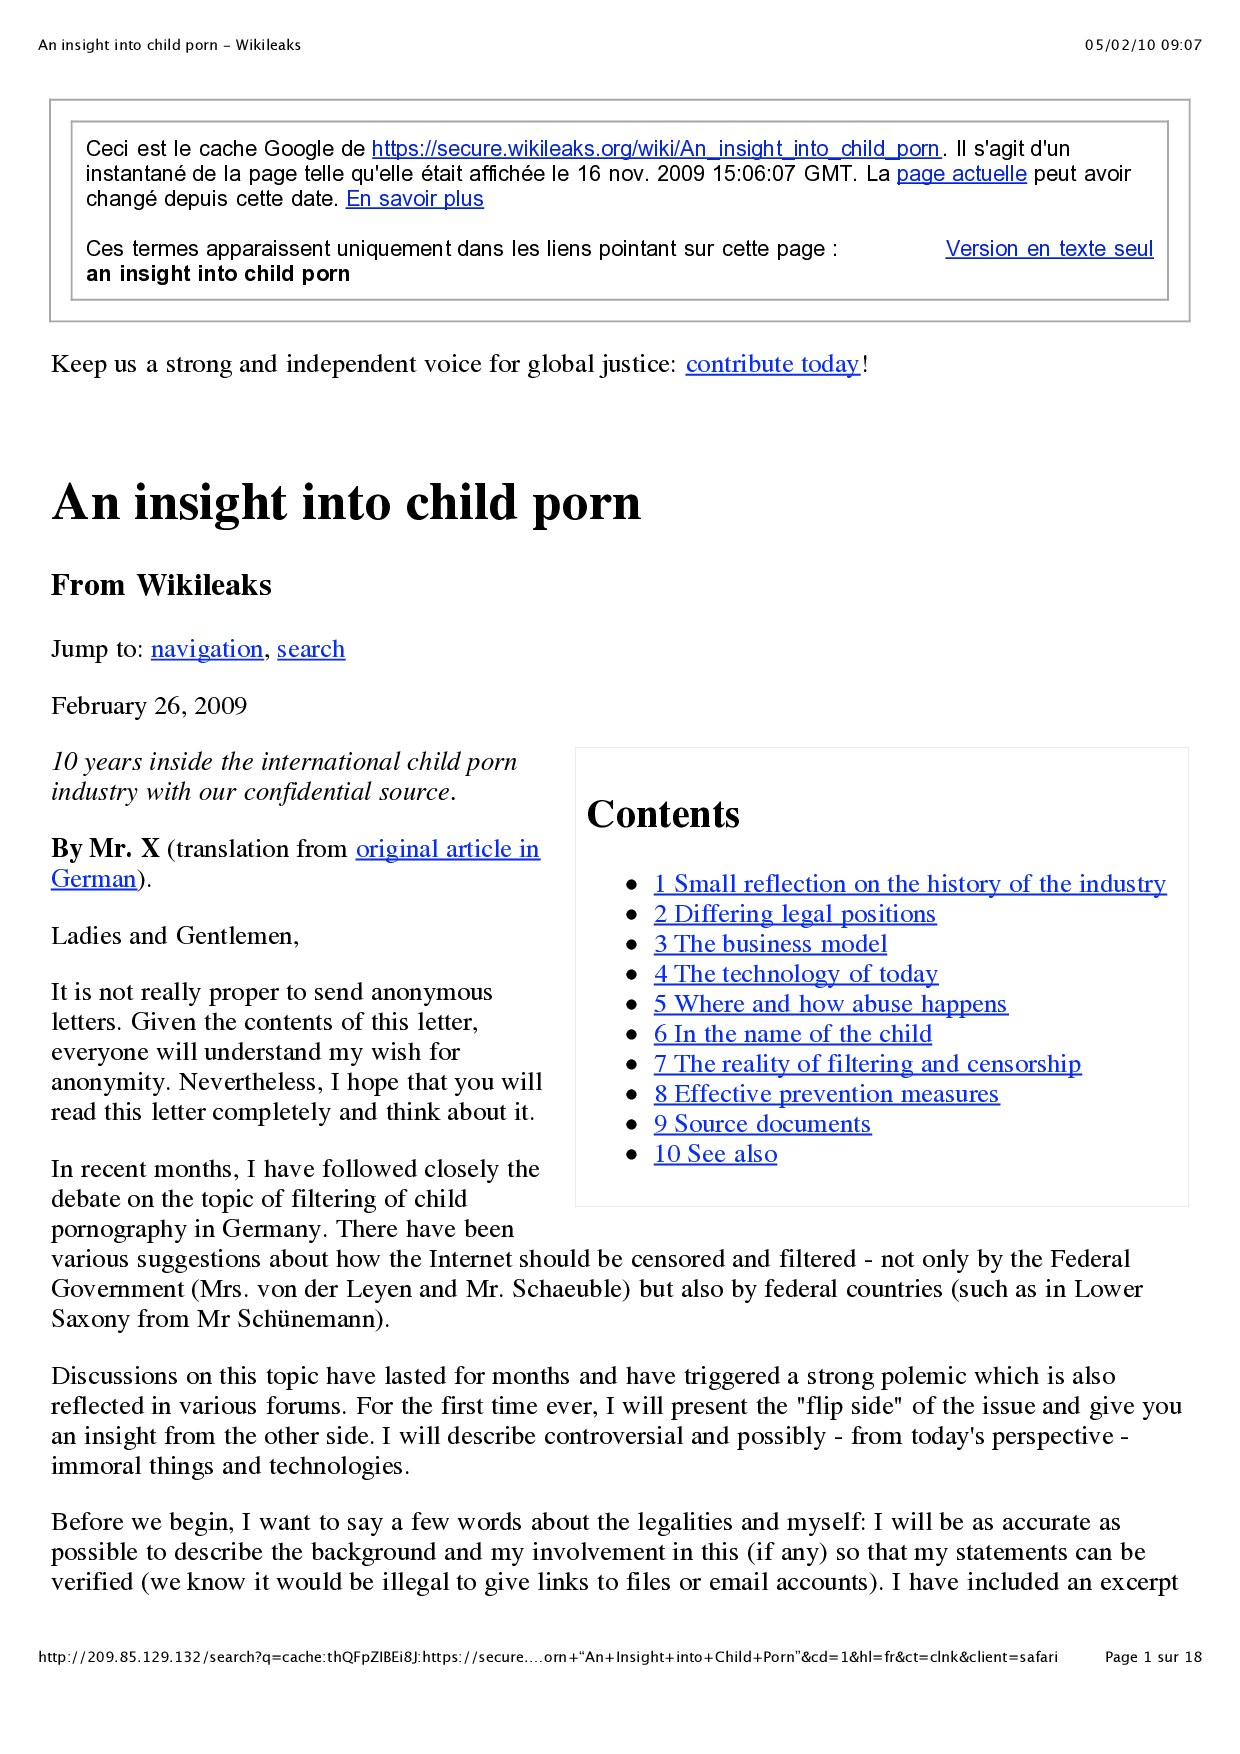 An insight into child porn - Wikileaks